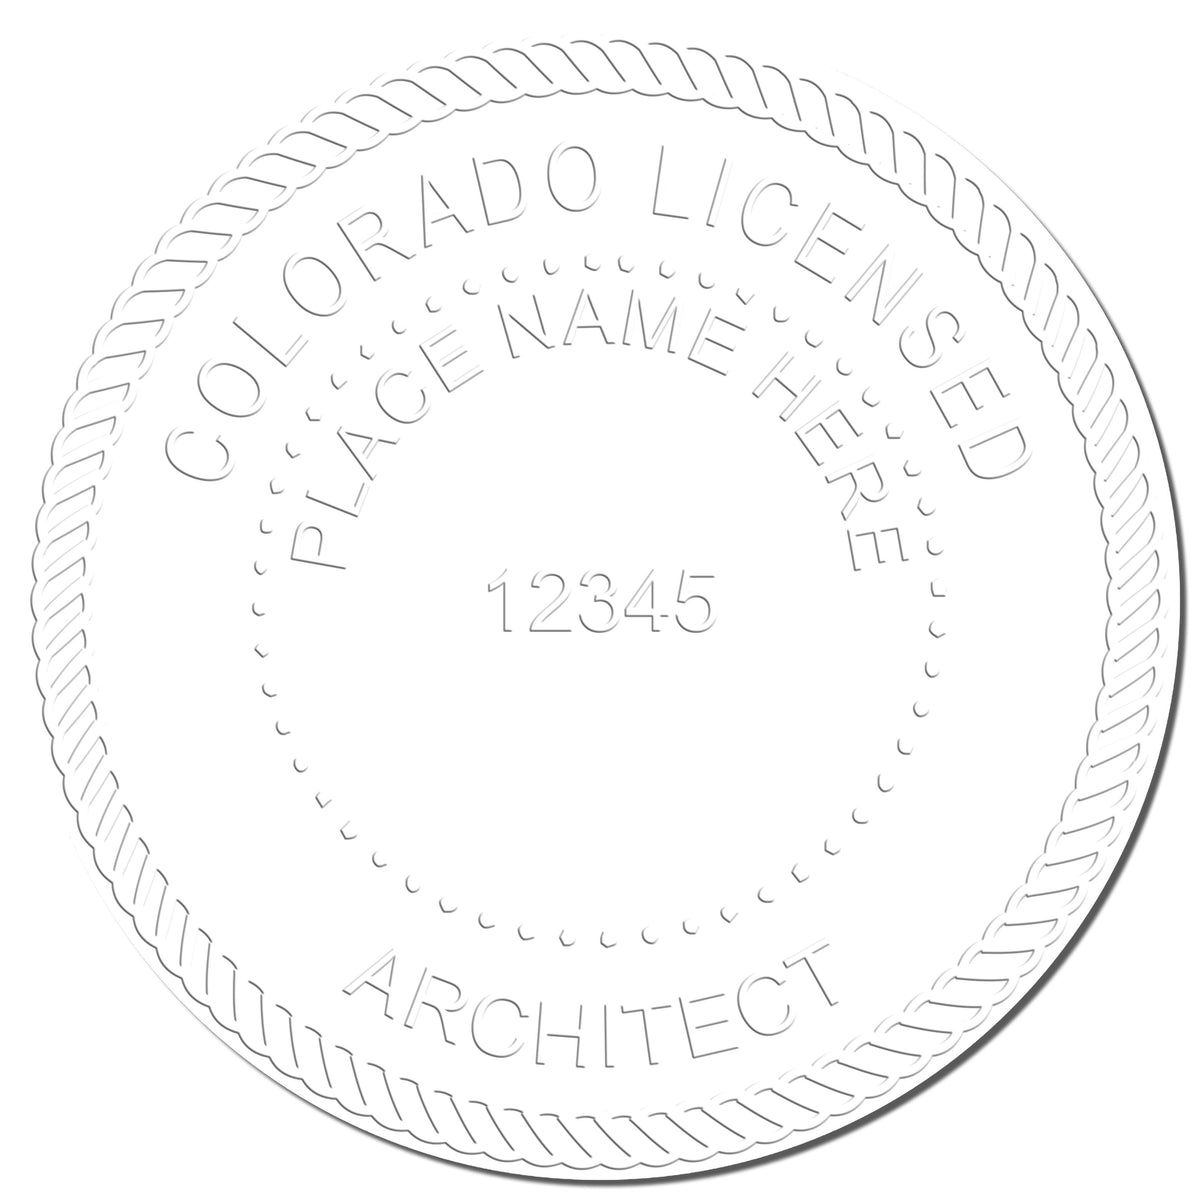 This paper is stamped with a sample imprint of the State of Colorado Architectural Seal Embosser, signifying its quality and reliability.